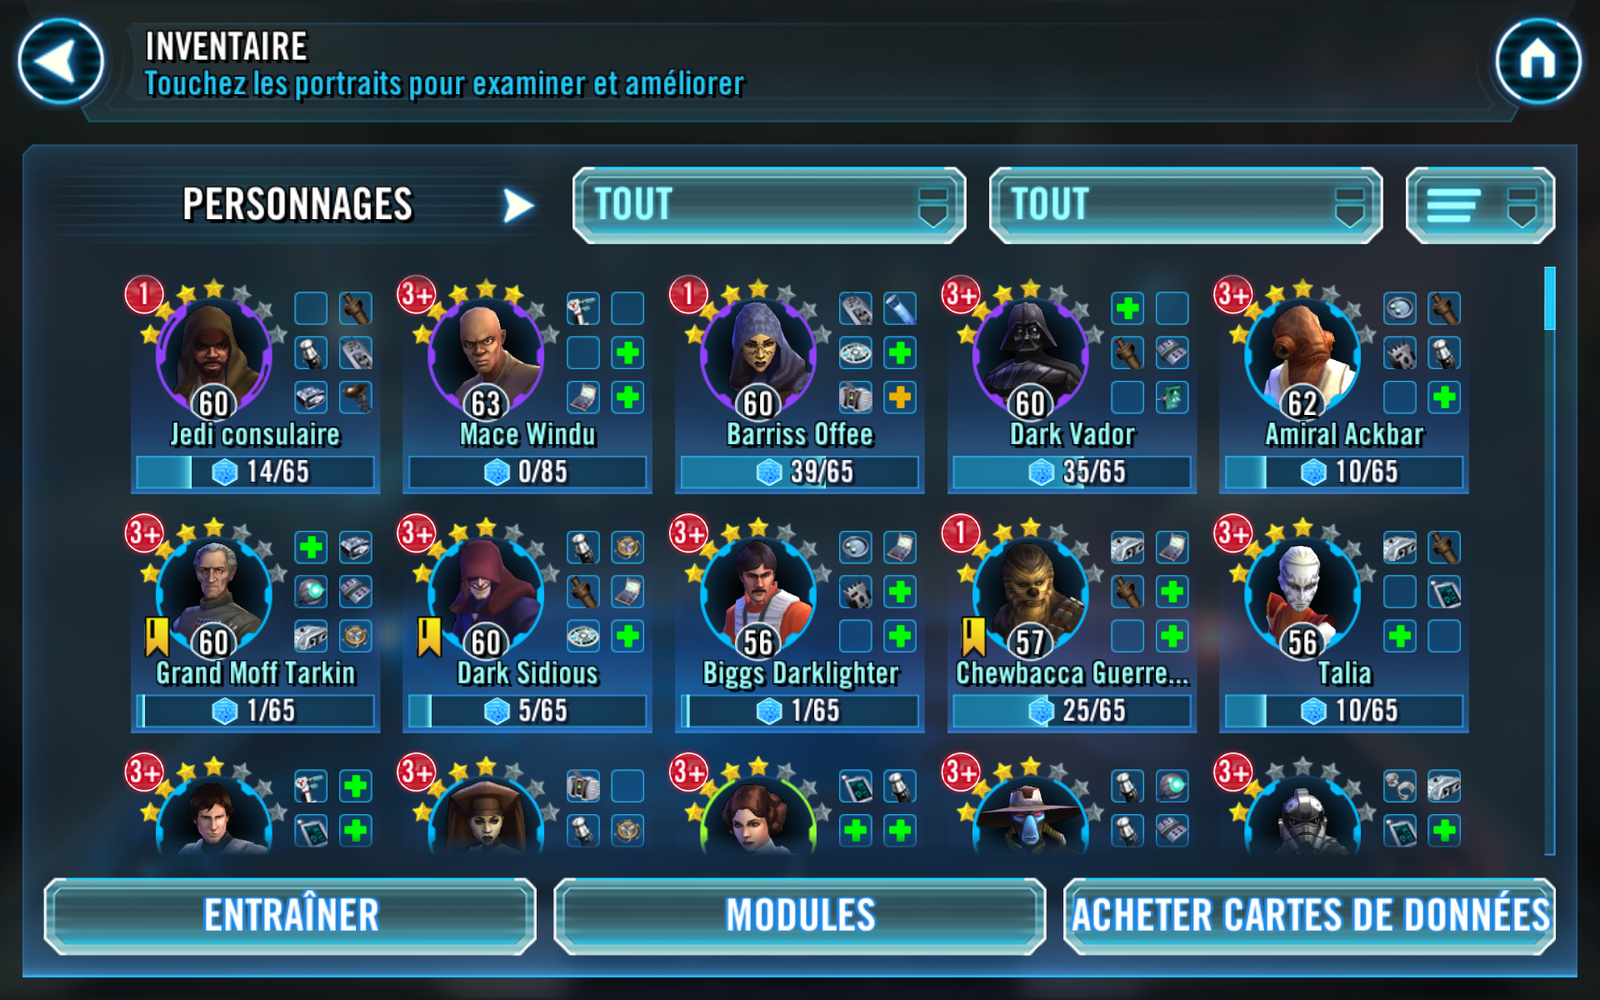 Star Wars Heroes of The Galaxy